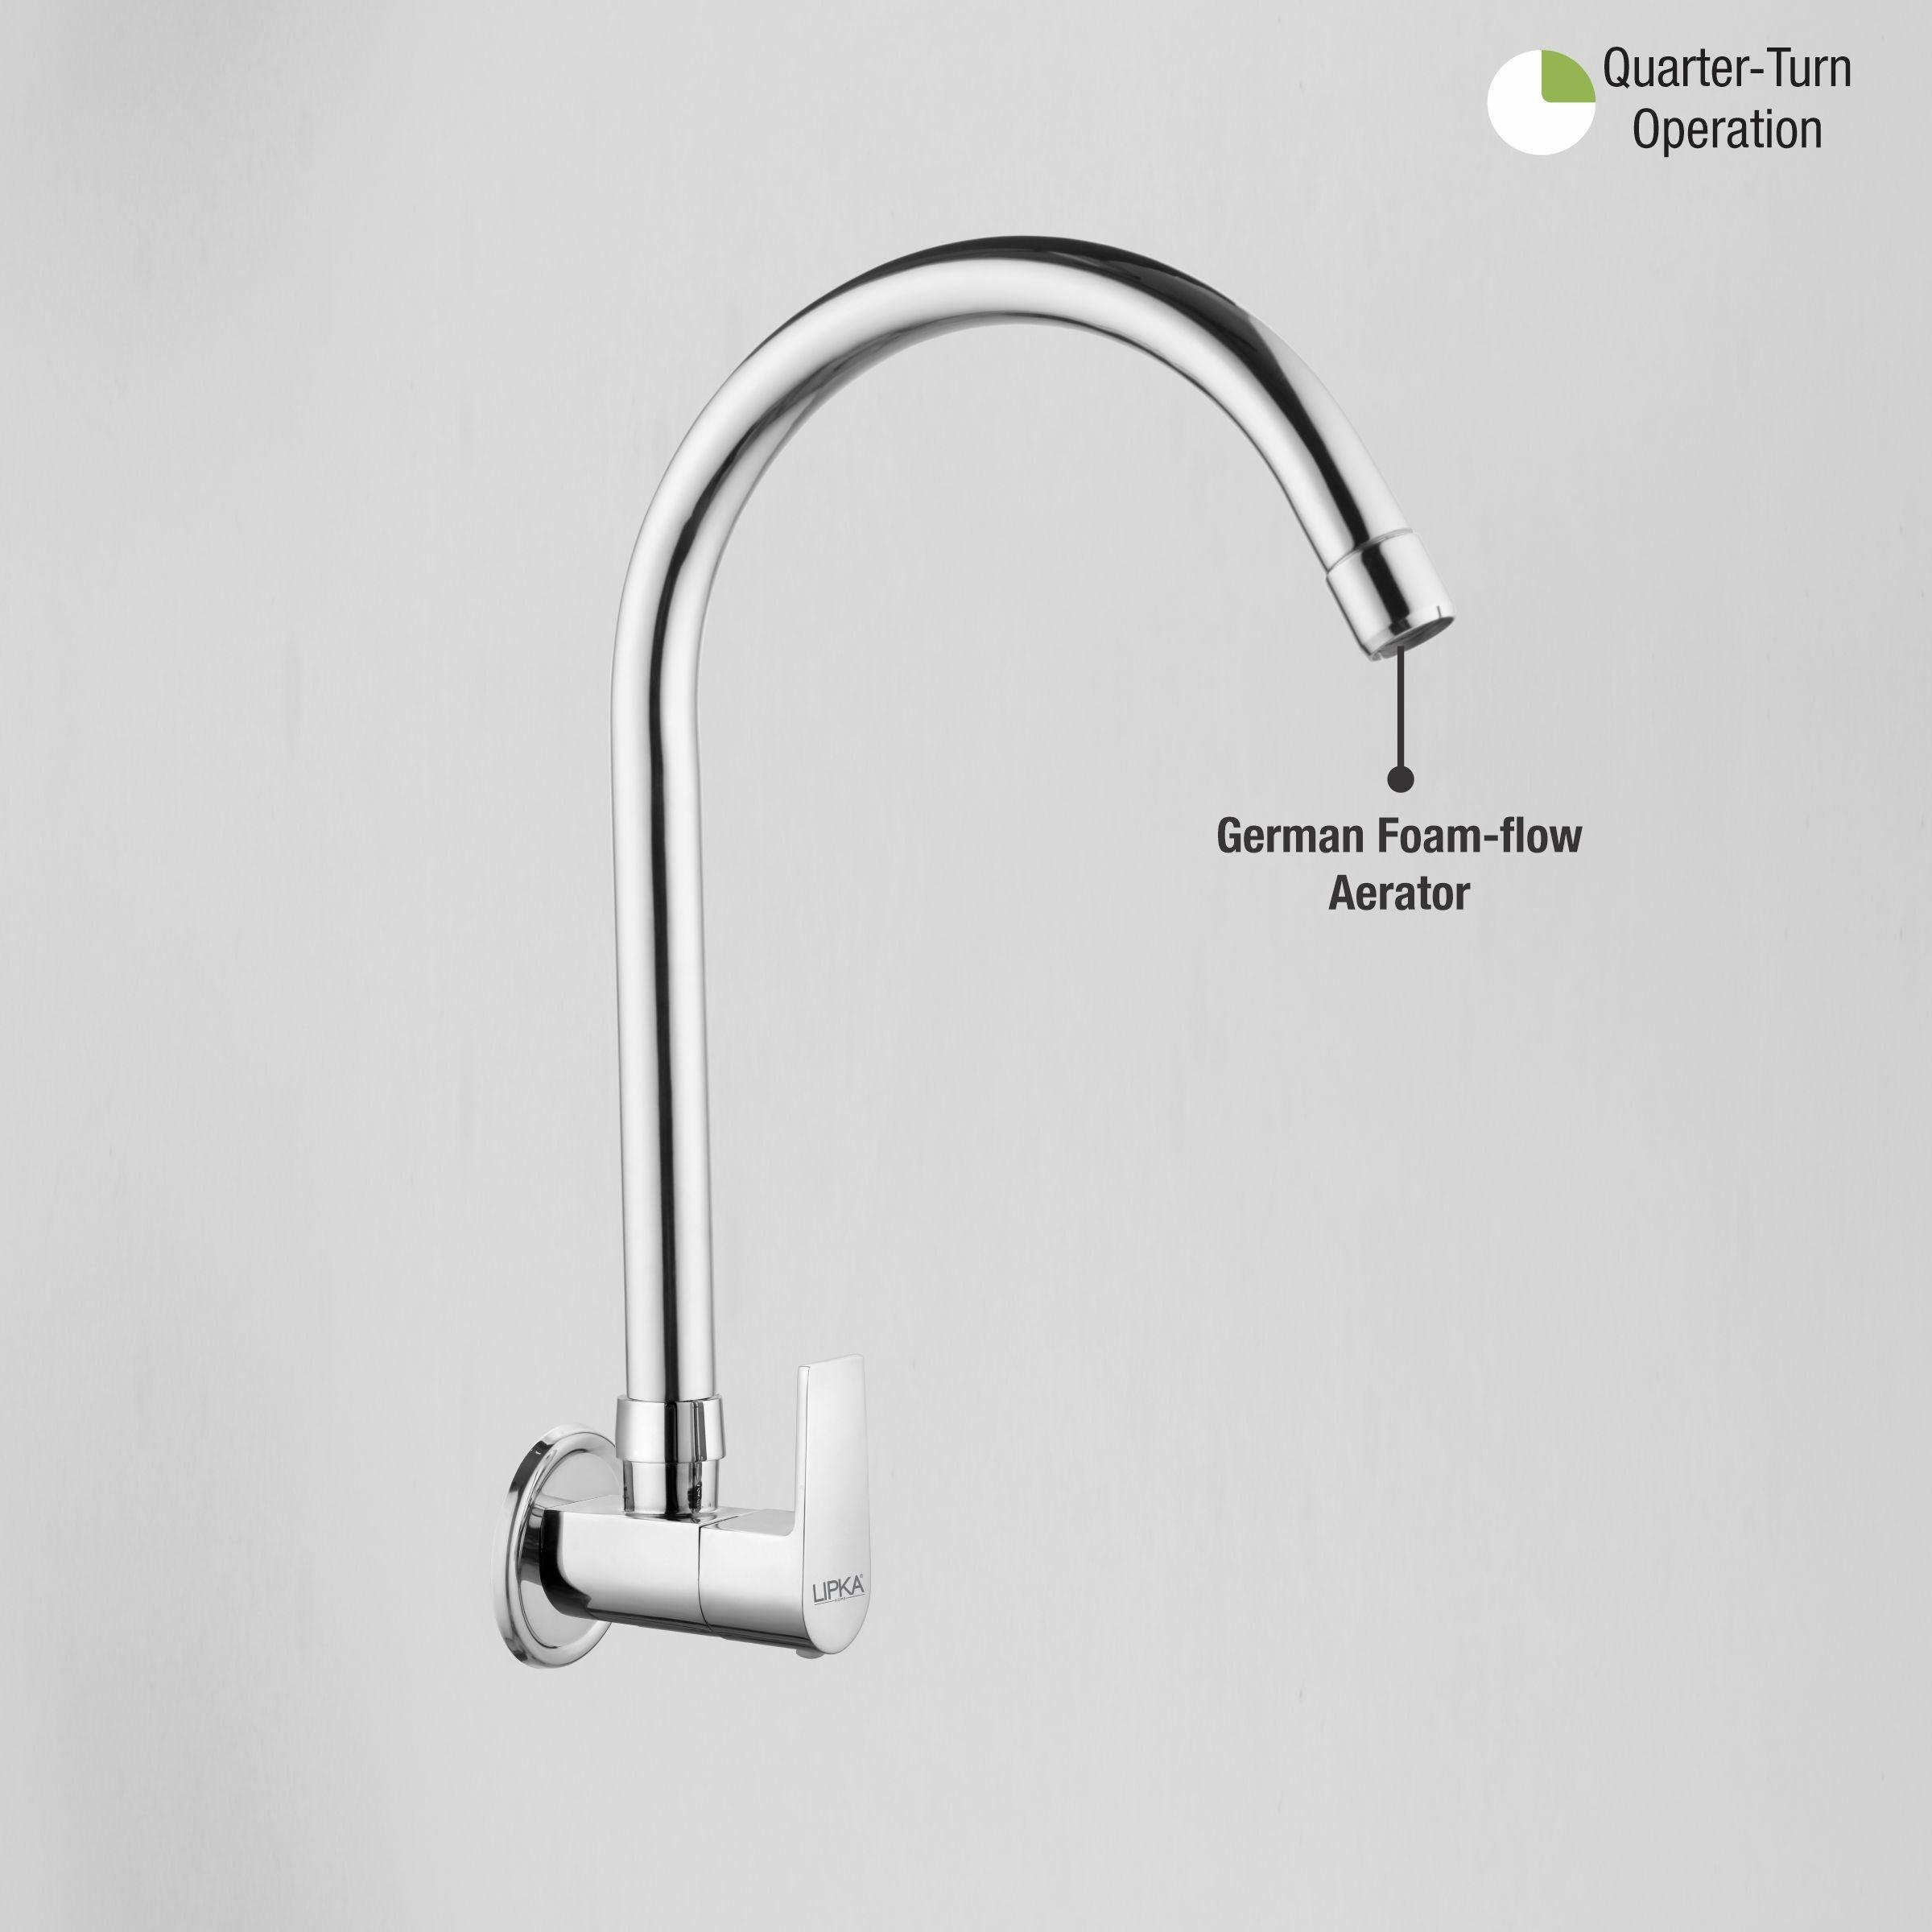 Victory Sink Tap Brass Faucet with Round Swivel Spout (20 Inches) - LIPKA - Lipka Home